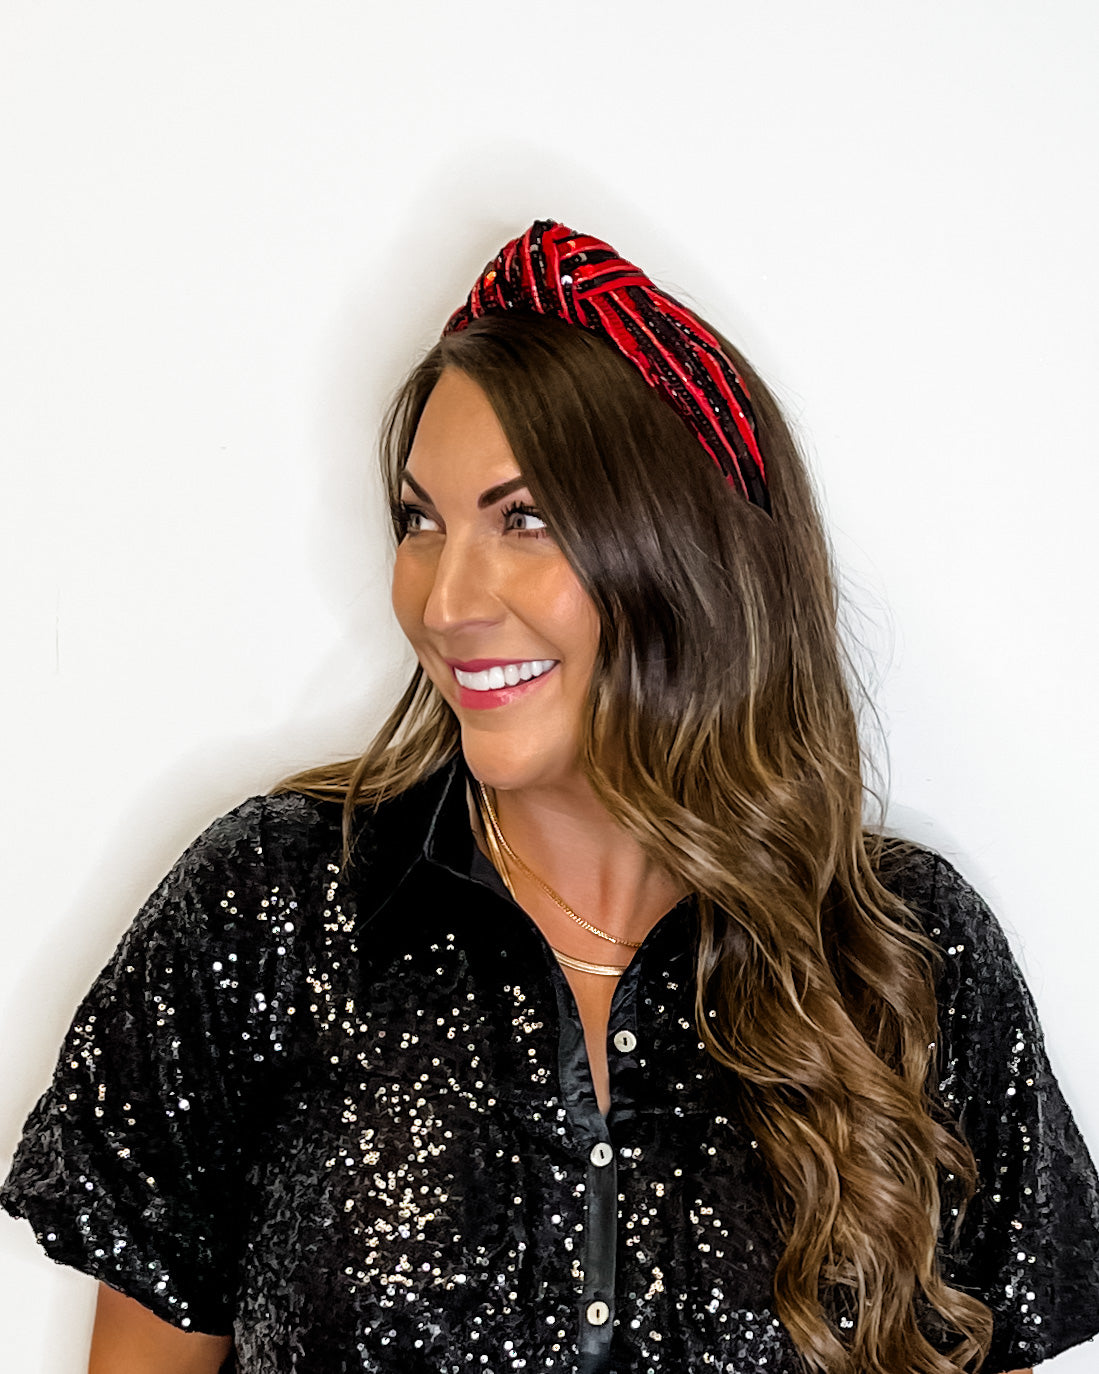 Team Color Stripe Sequin Knotted Headband